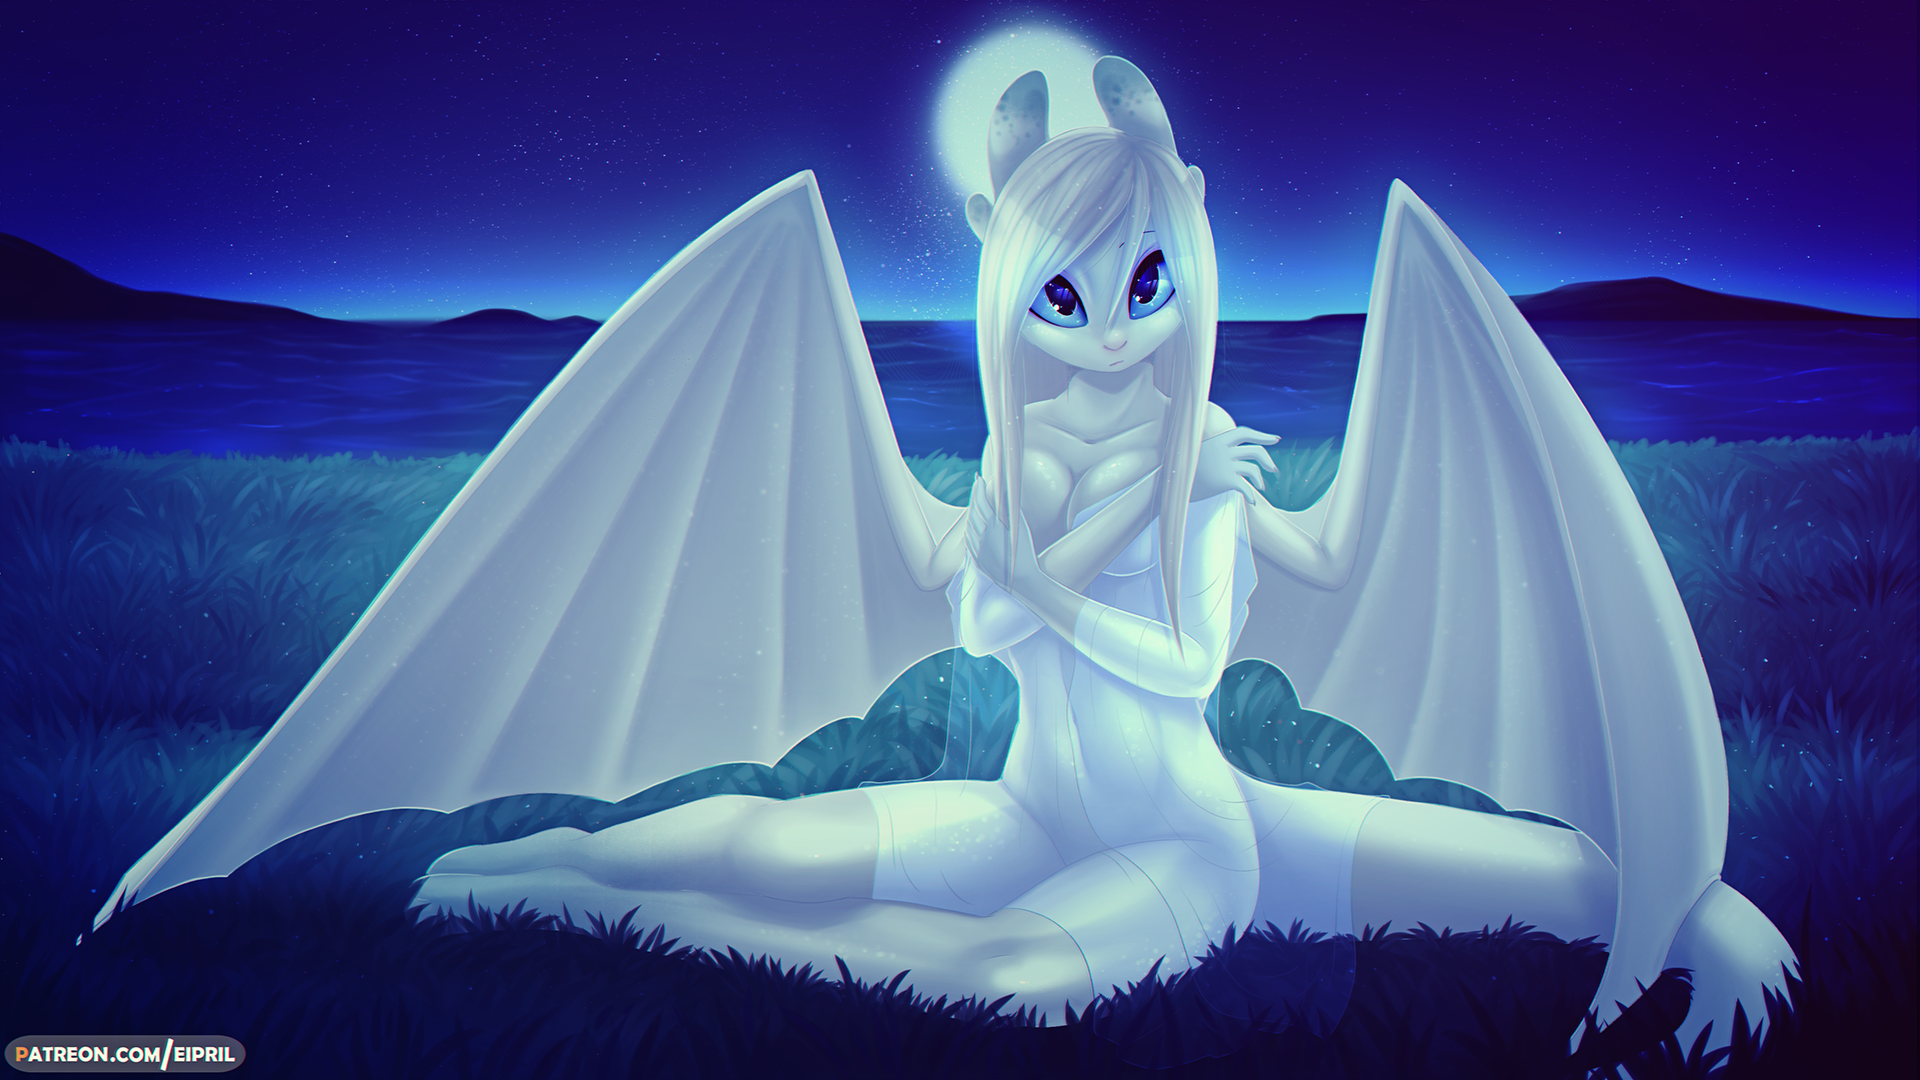 Light Fury by Eipril on Newgrounds.